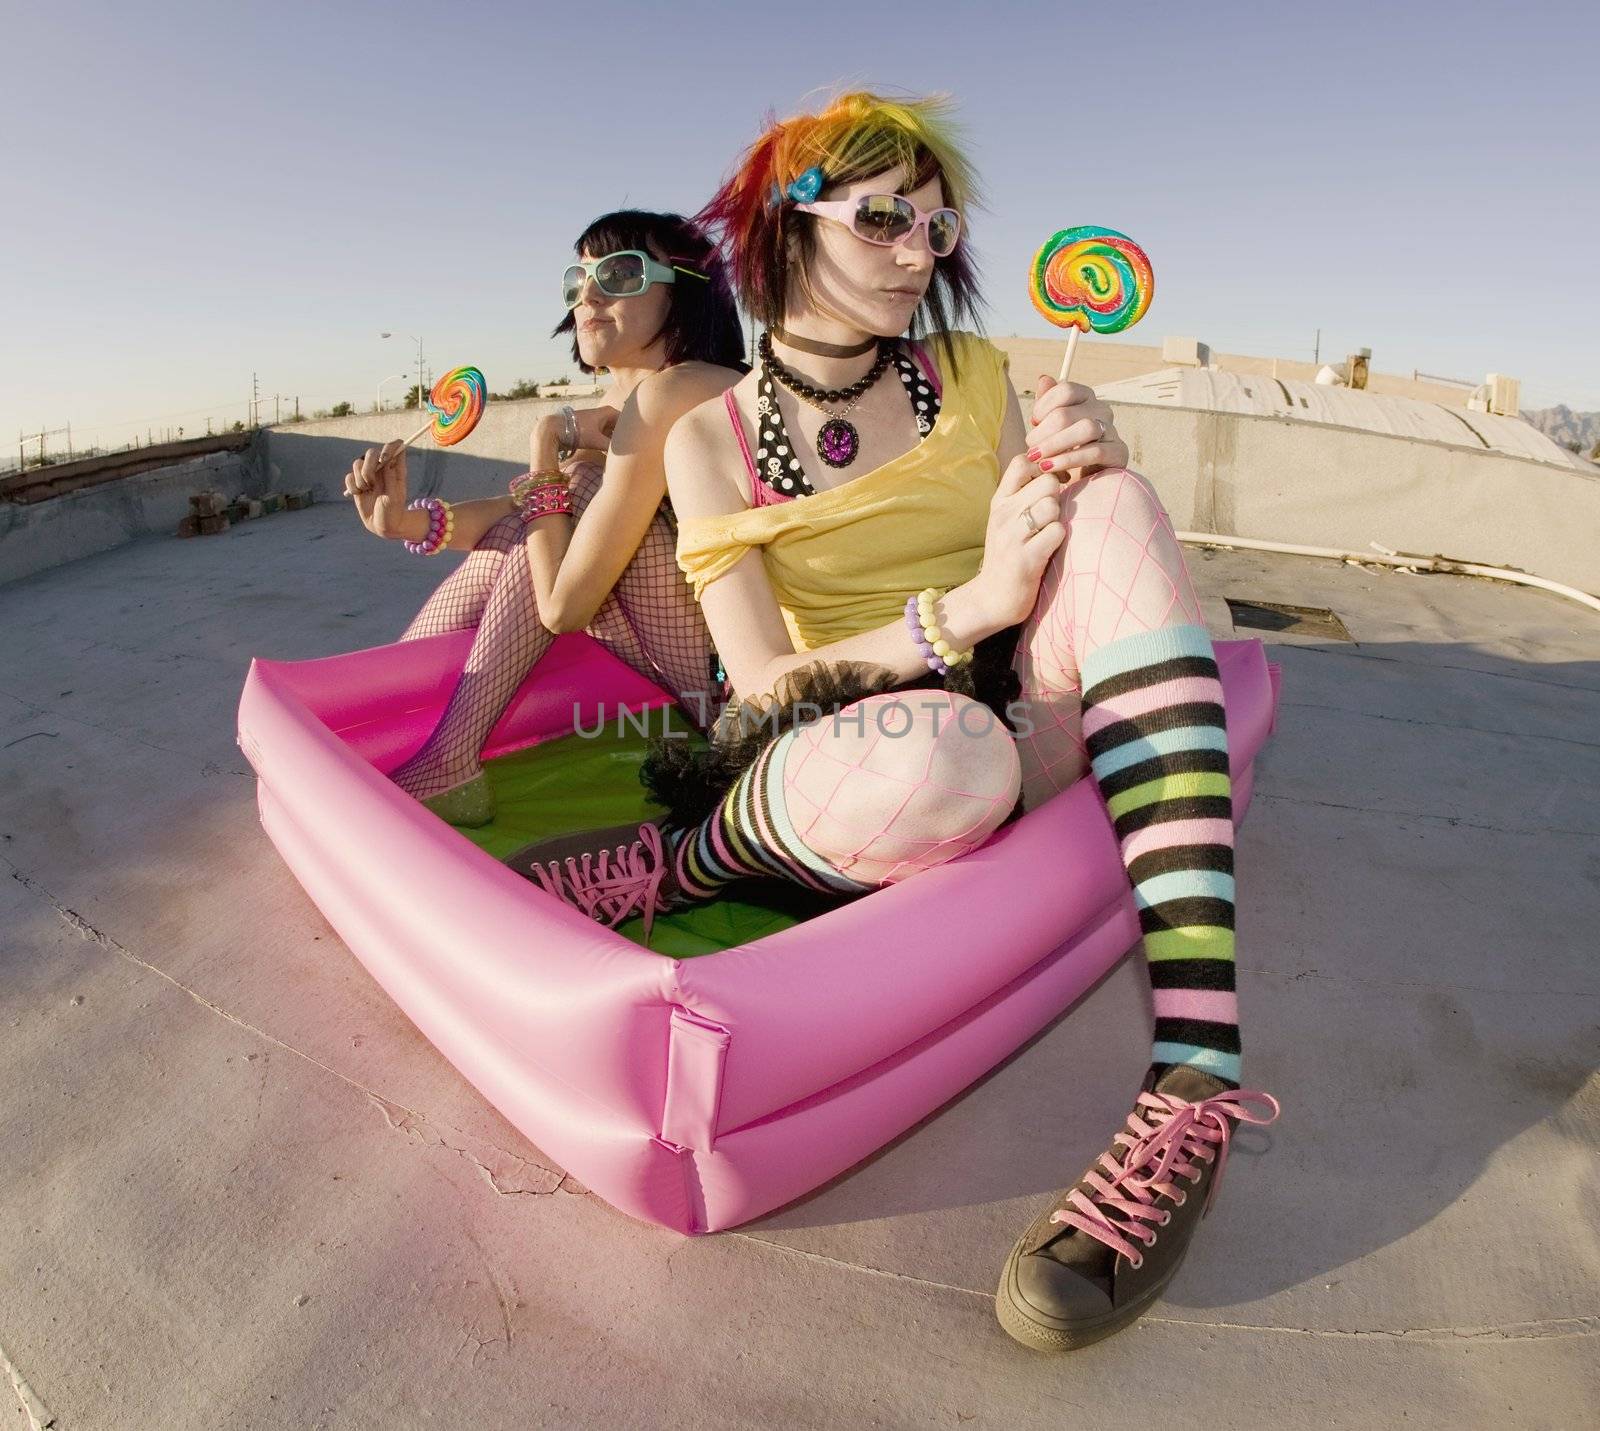 Fisheye shot of girls in brightly colored clothing in a plastic pool on a roof with sunglasses and lollipops